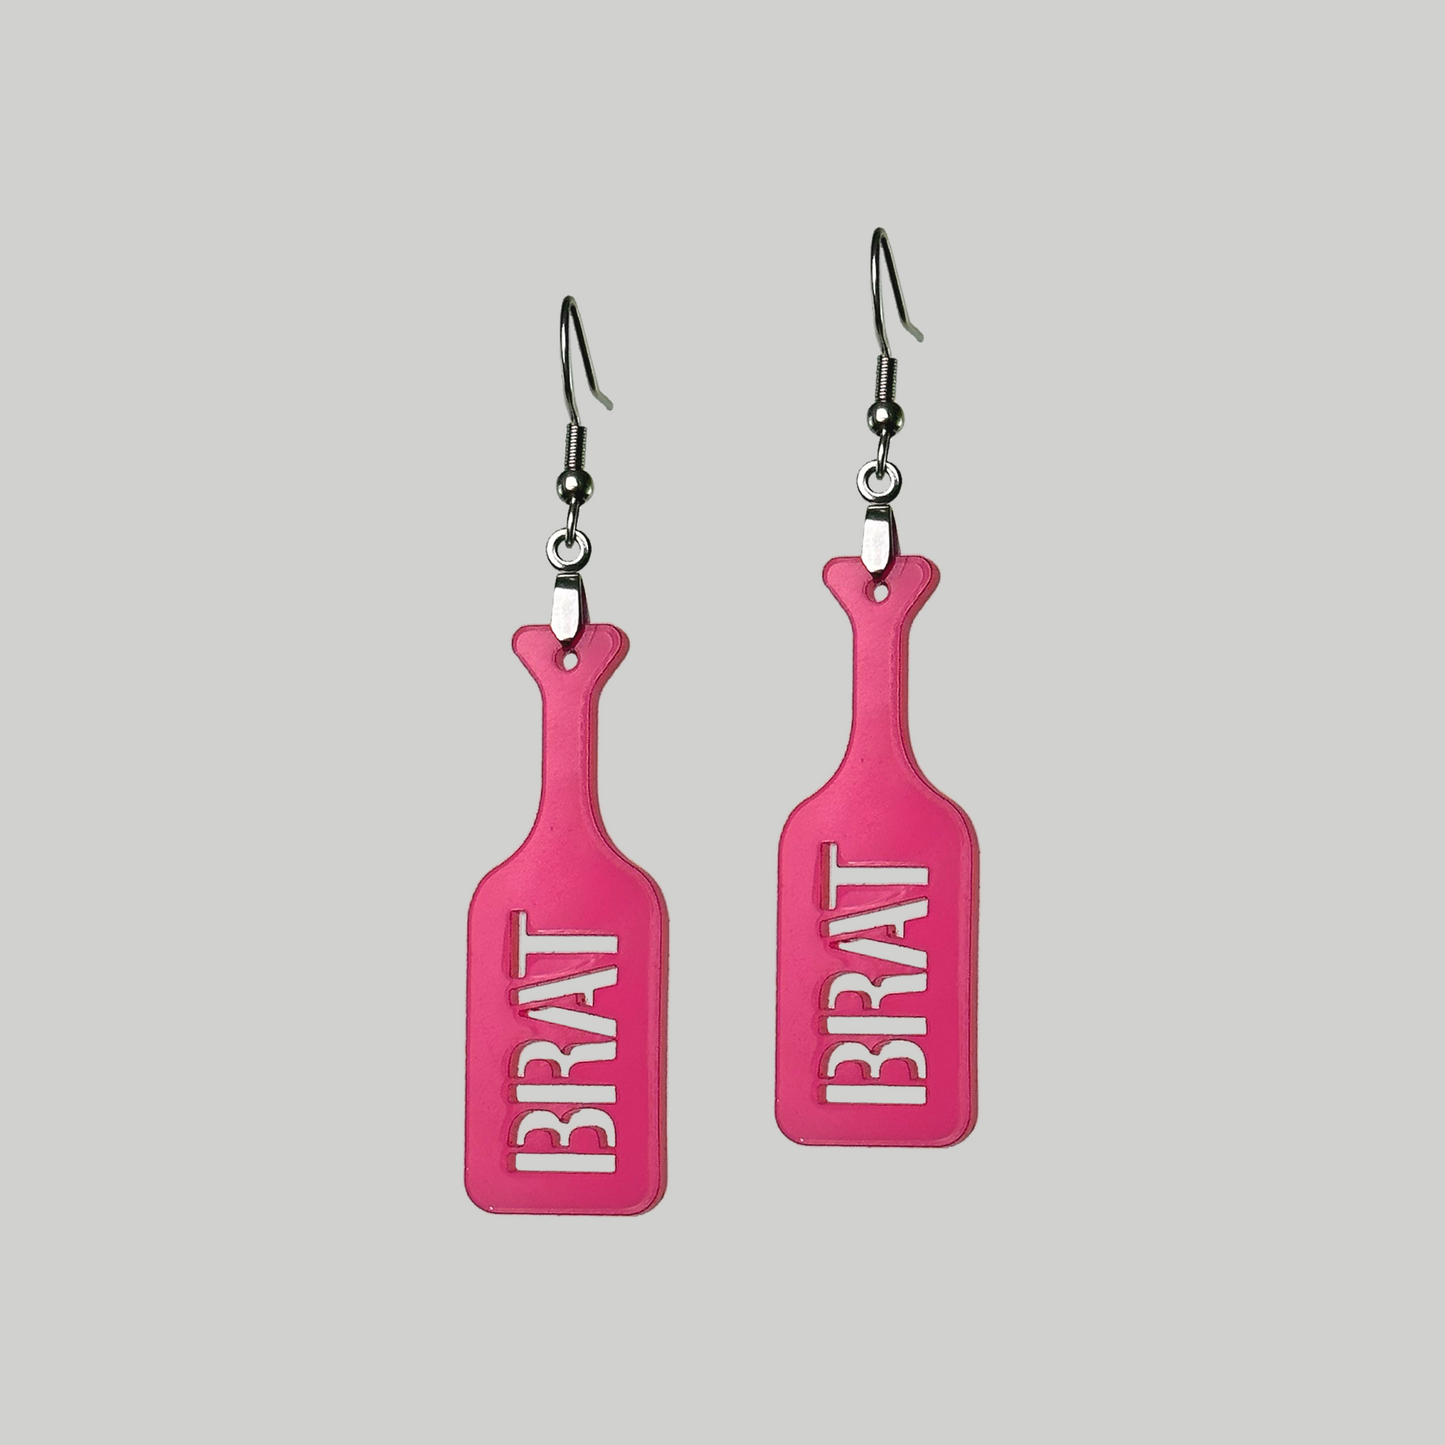 Brat Earrings: Playful and daring, these earrings showcase brat paddle designs for a distinctive allure.